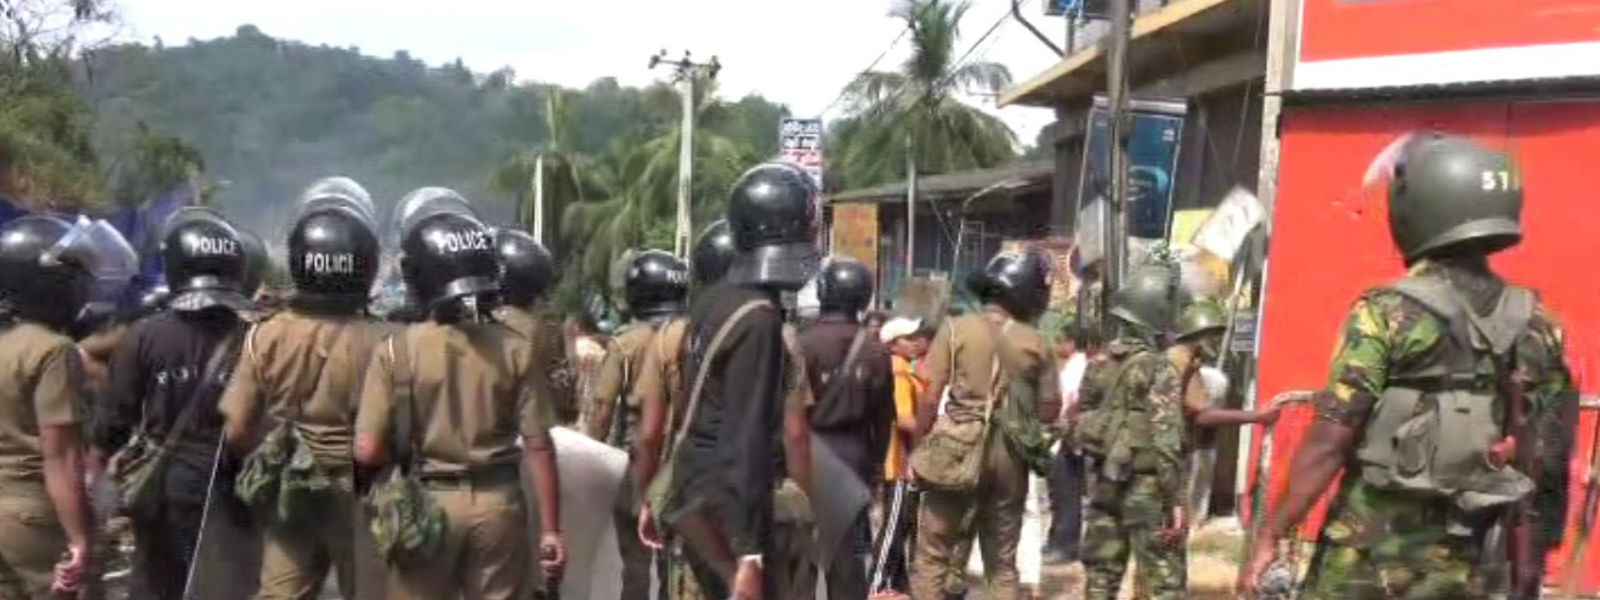 Tension in SL: Over 200 arrested, 161 from Kandy